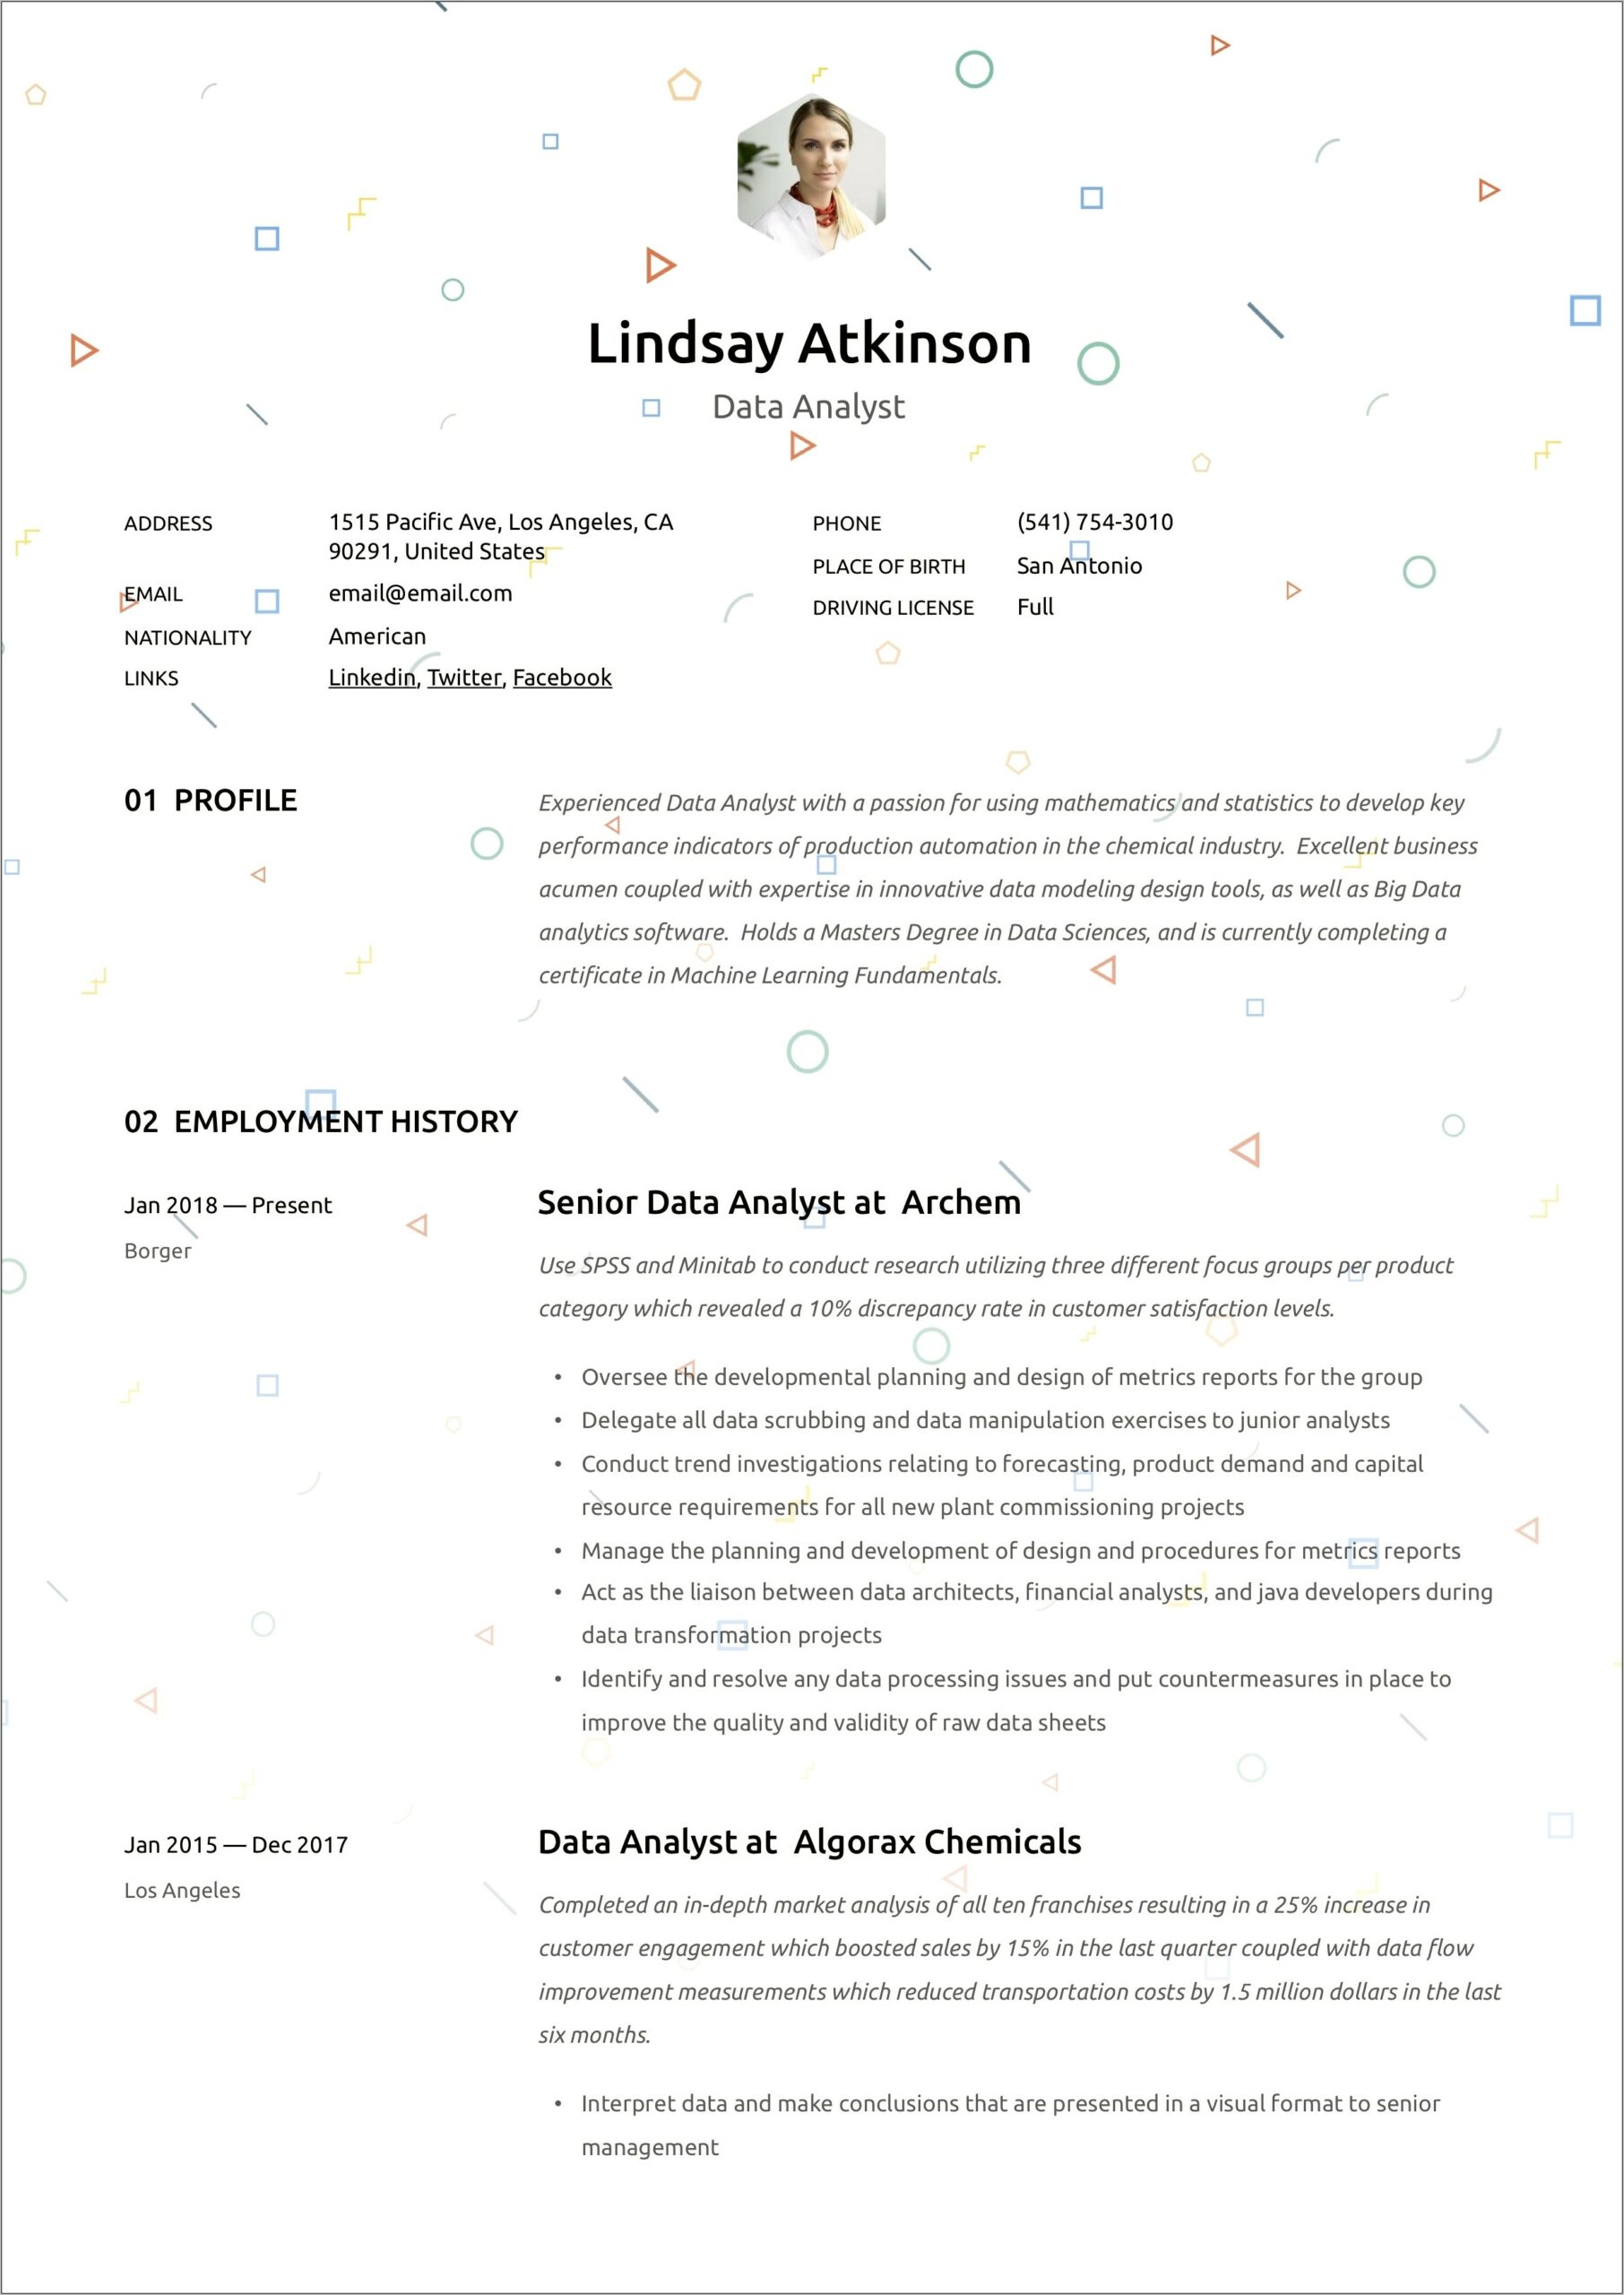 Excllent Data Analyst Summary For Resume